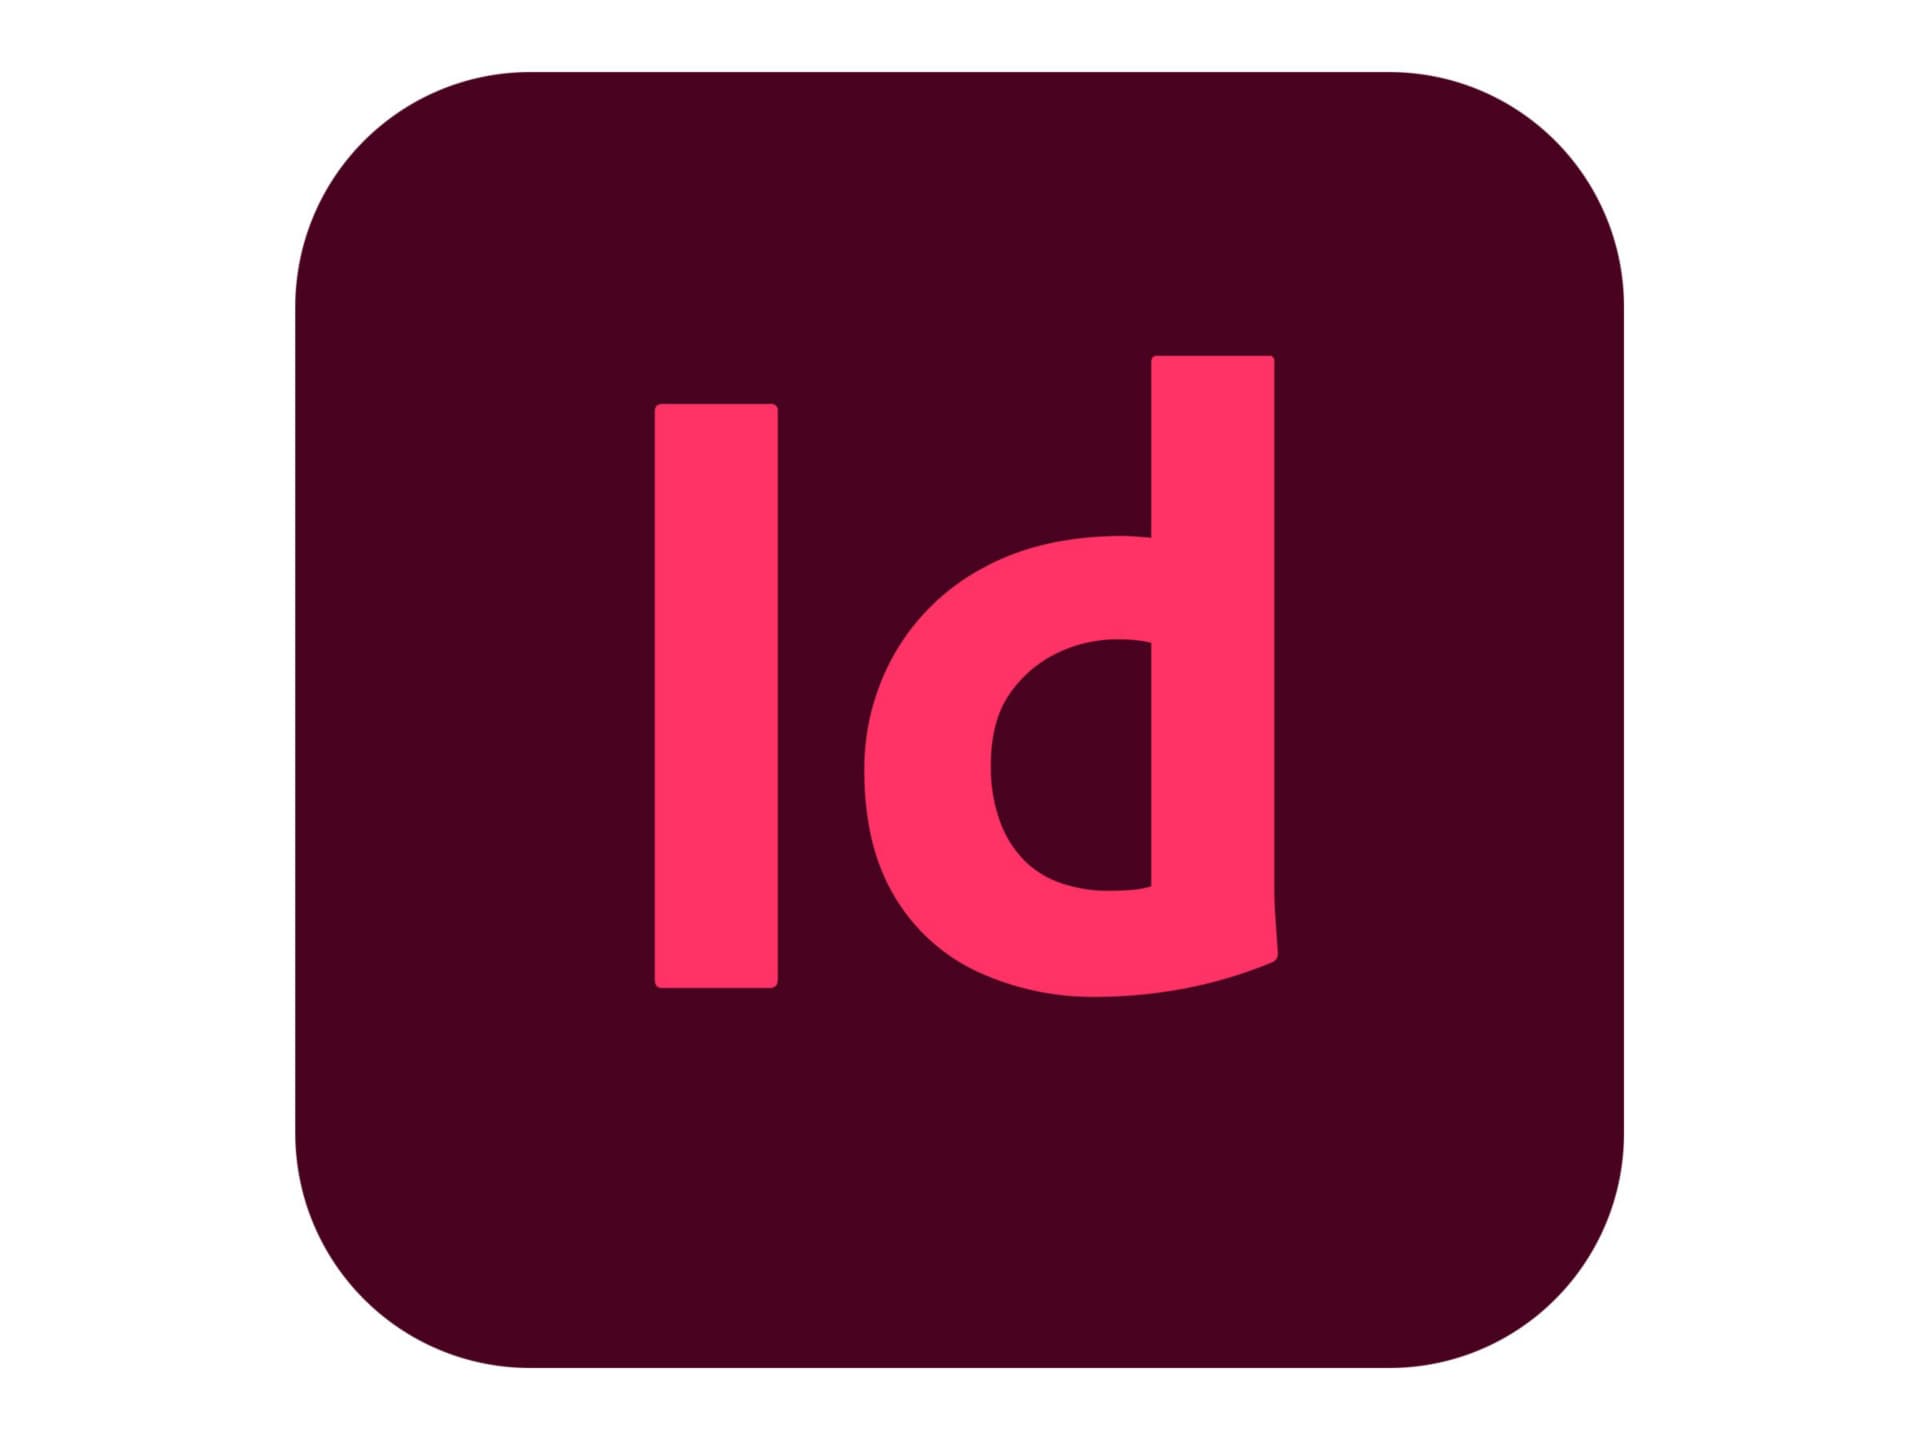 Adobe InDesign CC for teams - Subscription New (11 months) - 1 named user